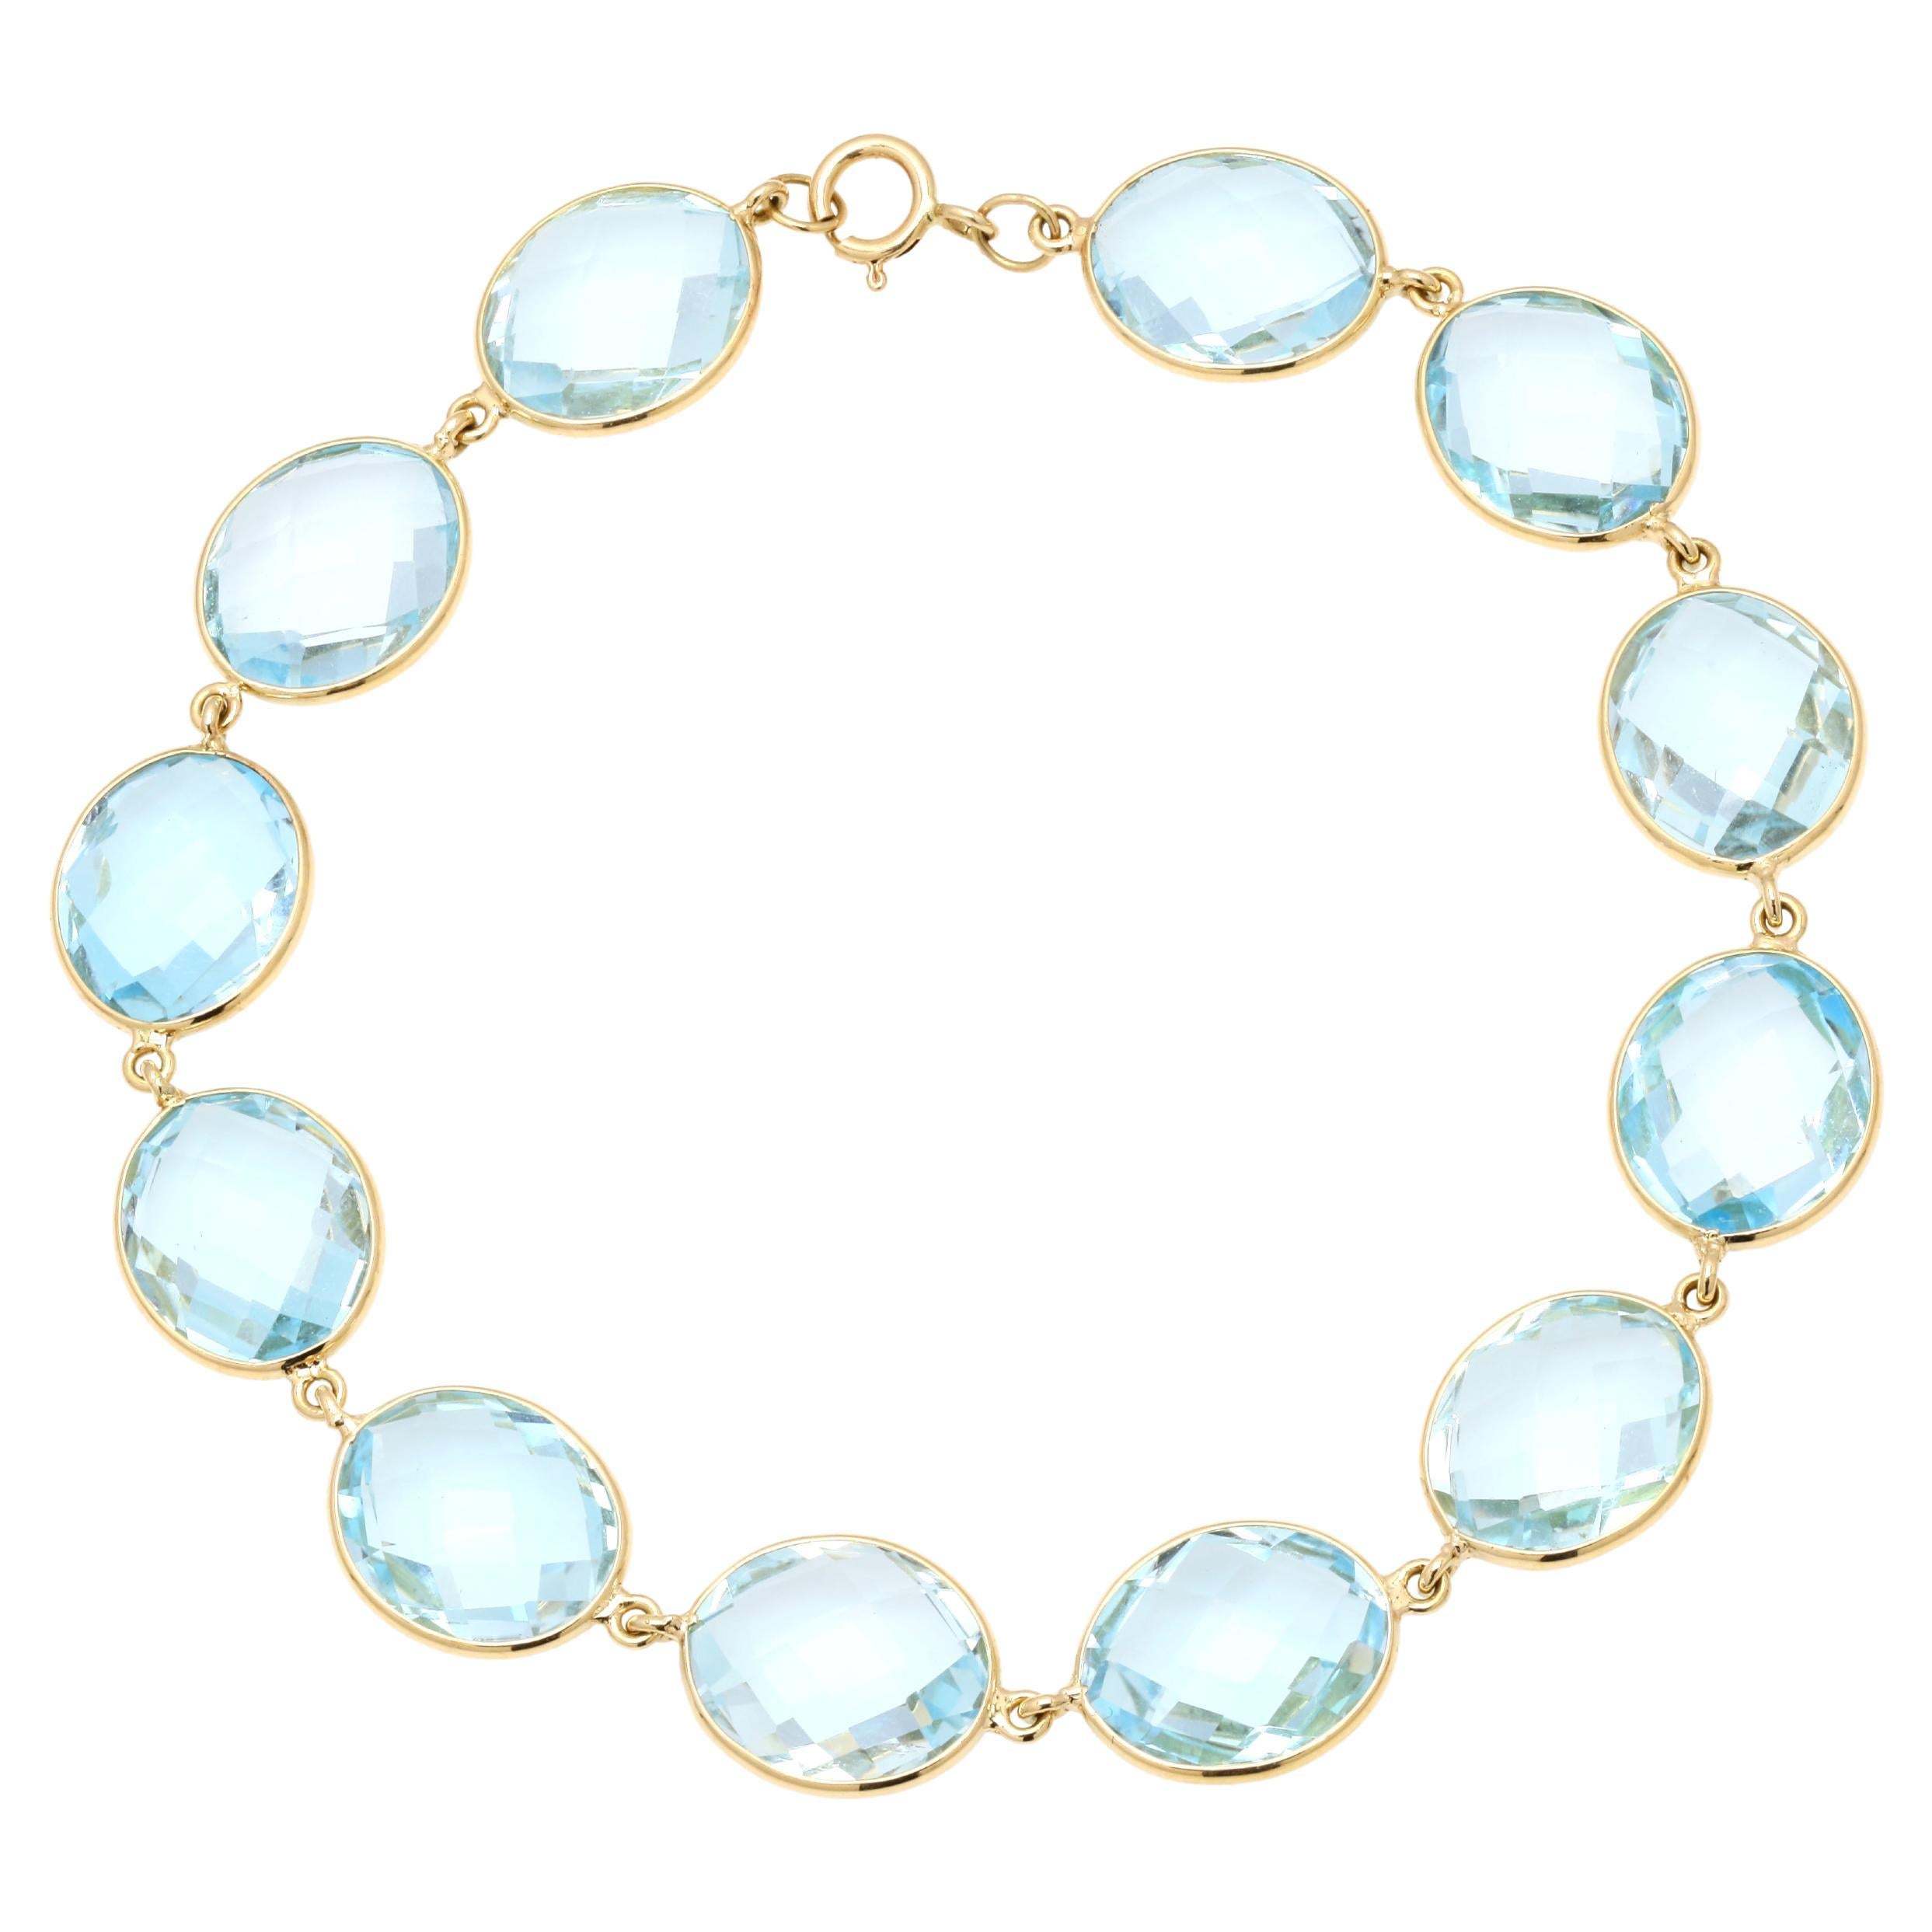 Translucent 41.7 ct Oval Blue Topaz Chain Bracelet in Solid 18K Yellow Gold